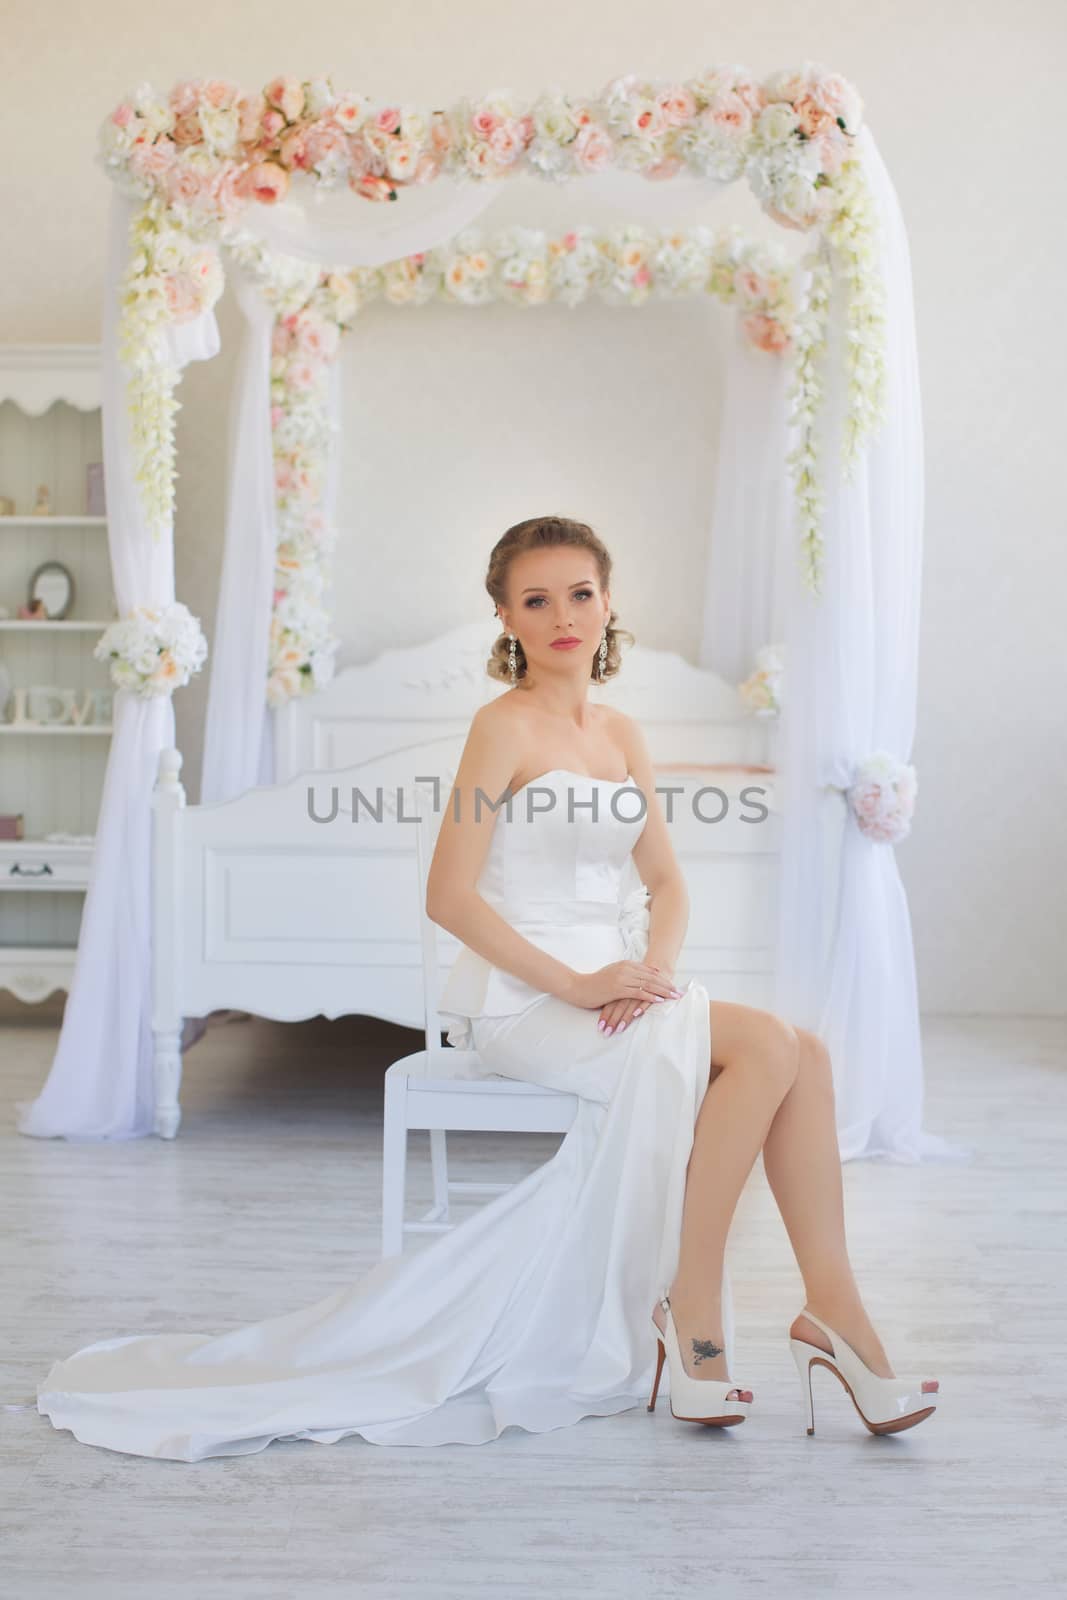 The bride in a long white dress in the room